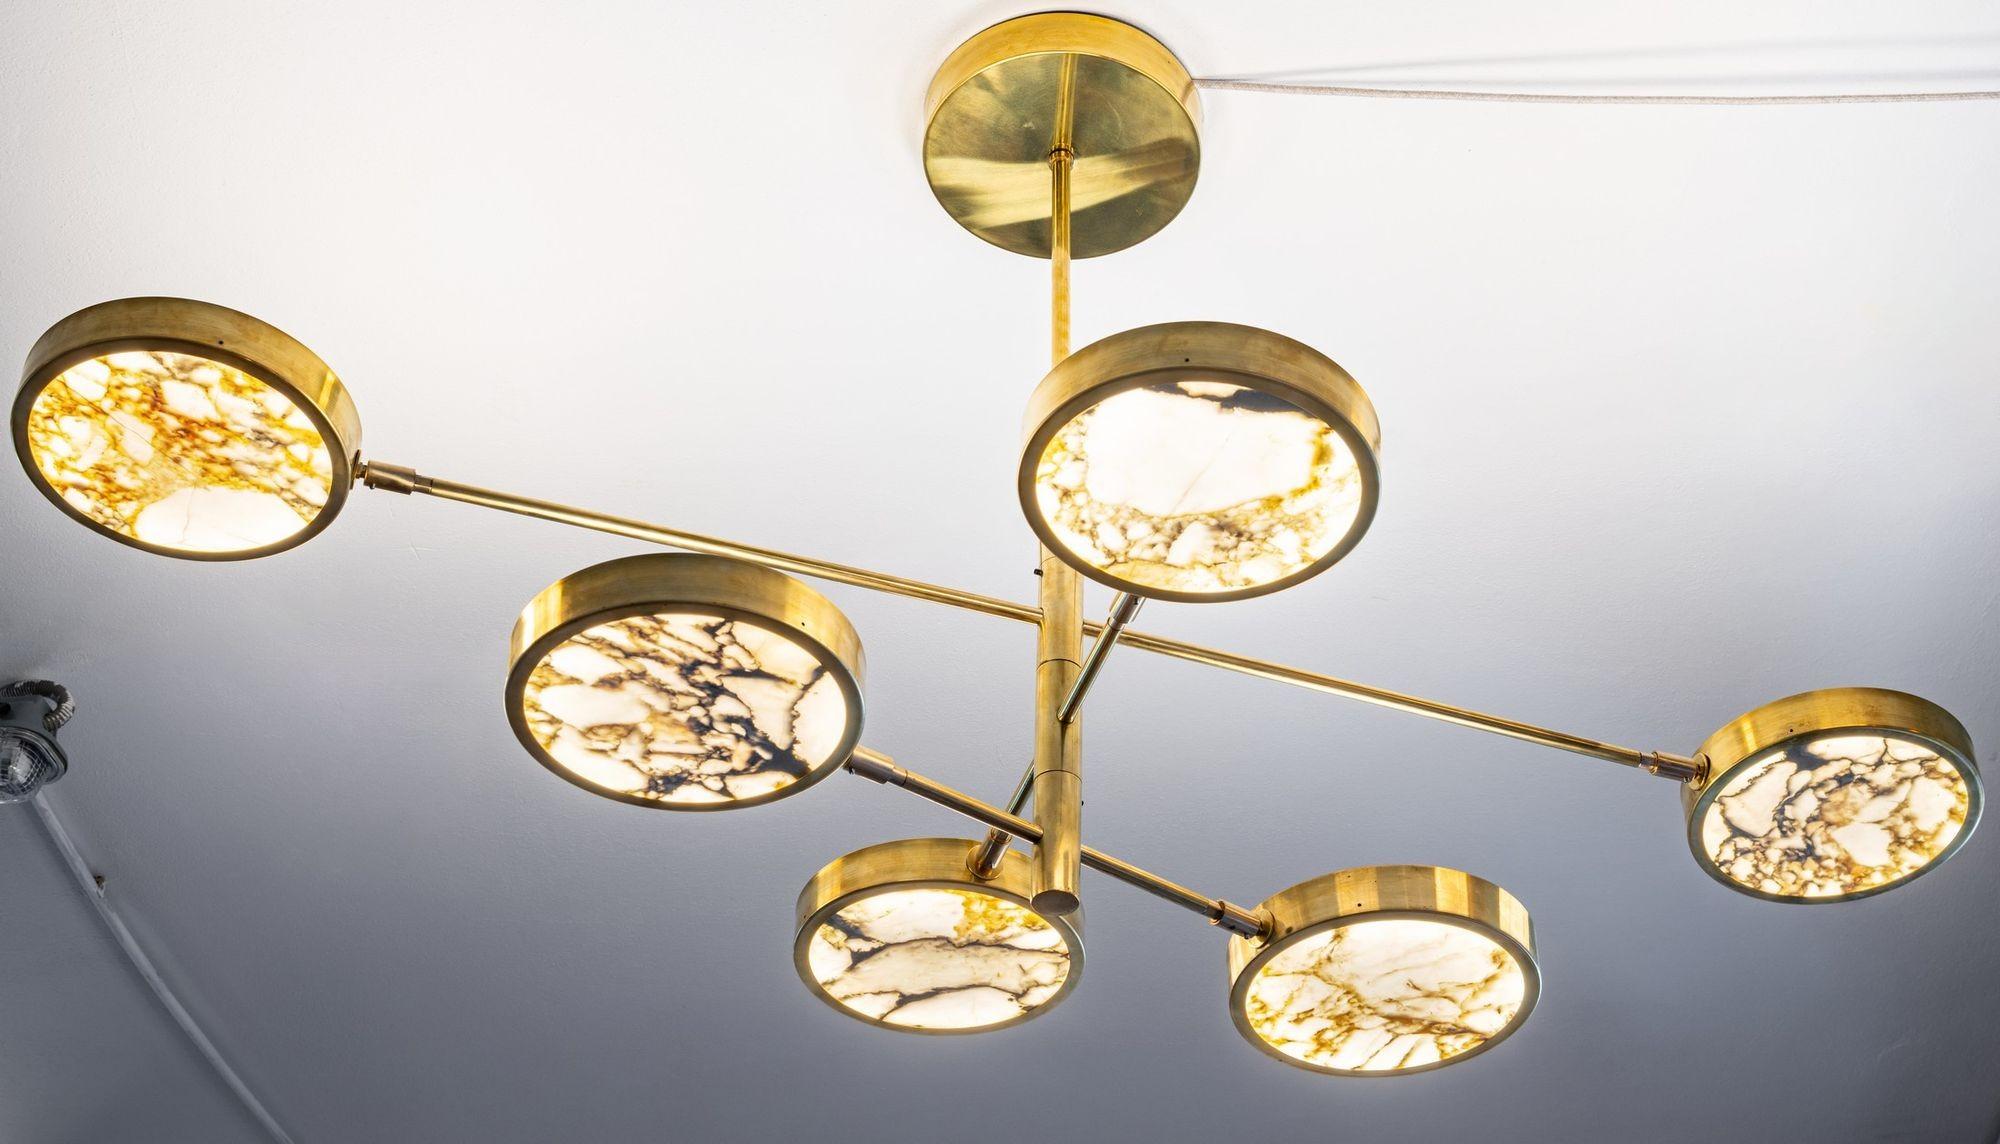 Our luxury chandelier showcases thin cut Calacatta gold marble - an elegant rare marble extracted from the Tuscan Alps. This prestigious Italian marble stands out among others with its veining, transitioning from a warm gray to a resplendent golden